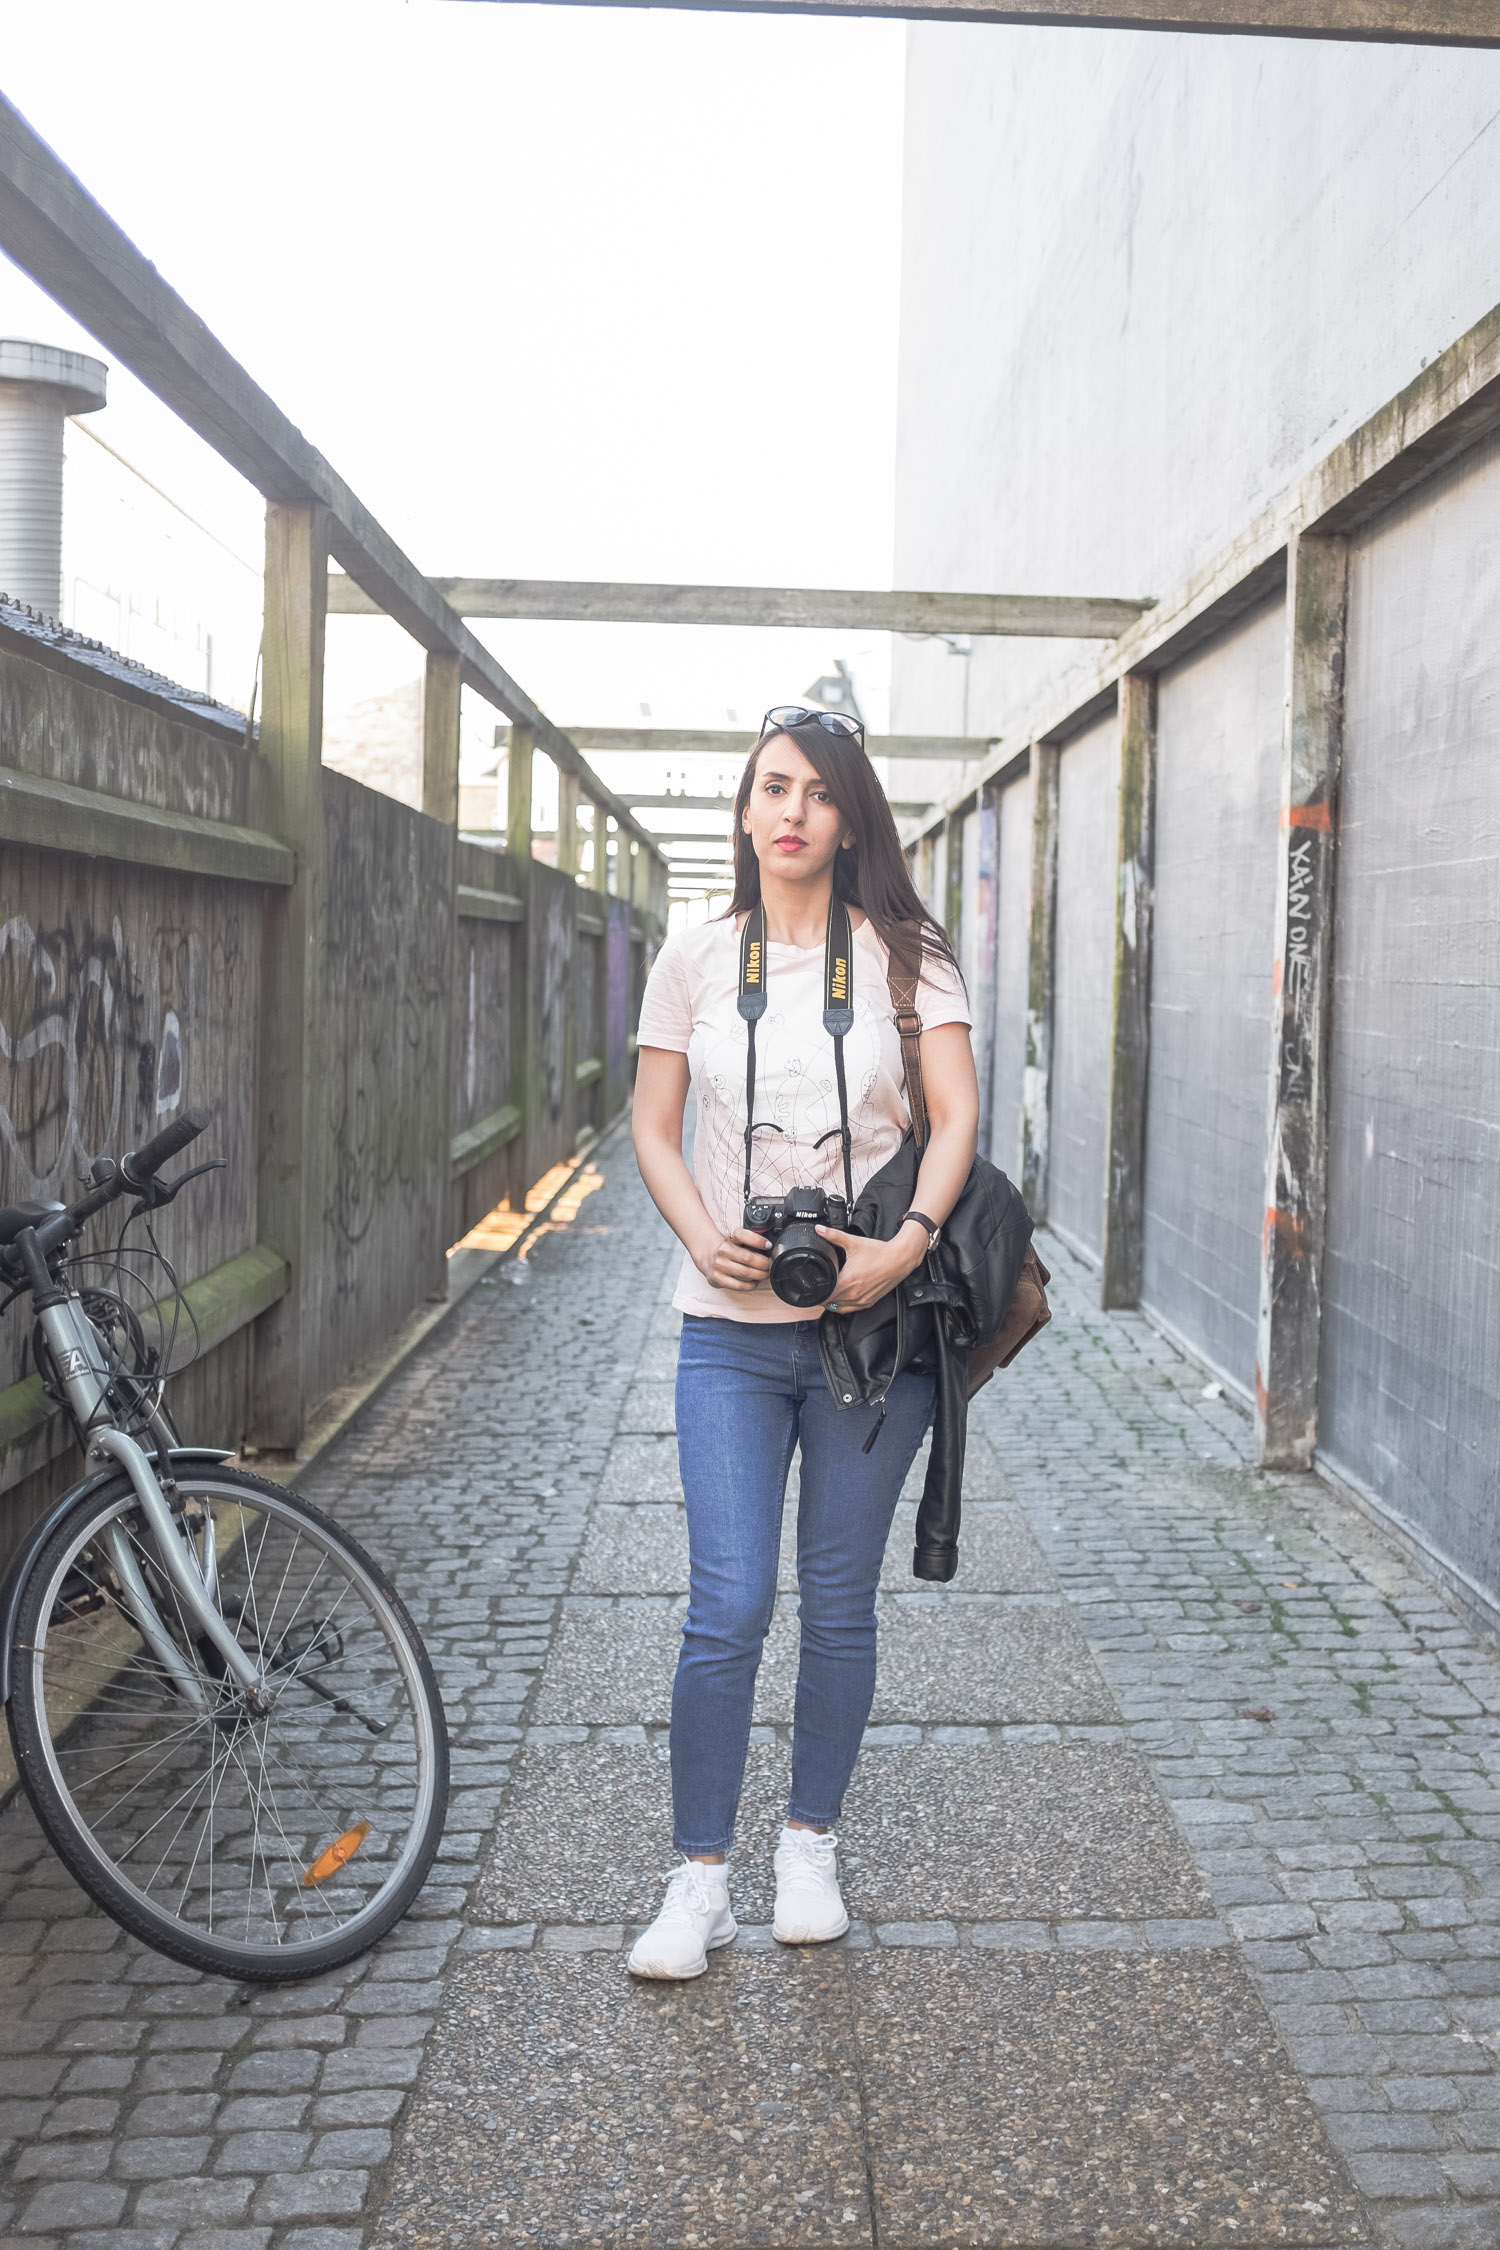 Arina standing with a Nikon camera in an alley with her bike next to her